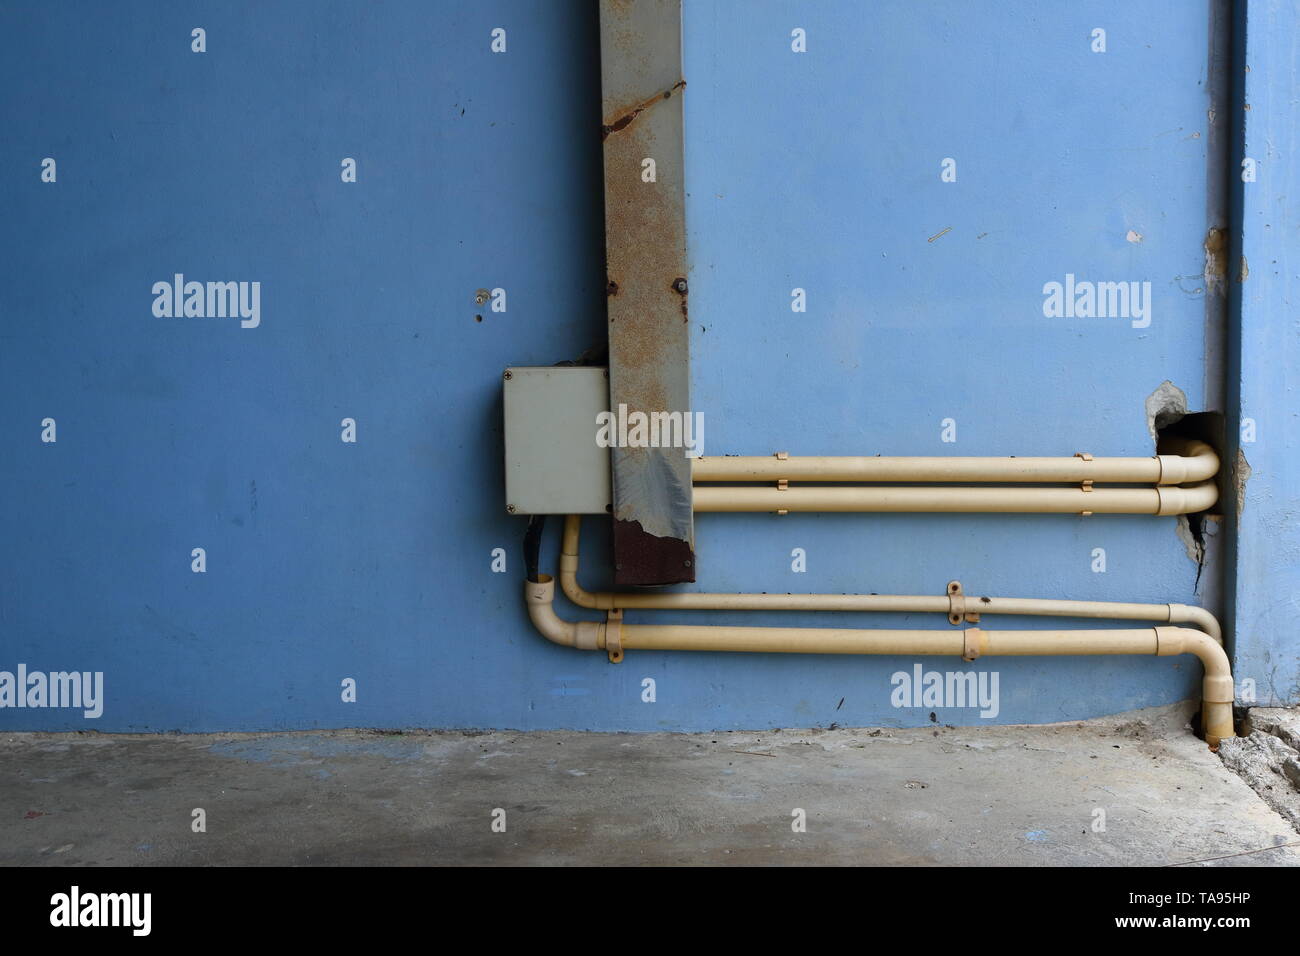 Electrical junction box and wireway connected to electrical pipes for power distribution, connection concept Stock Photo